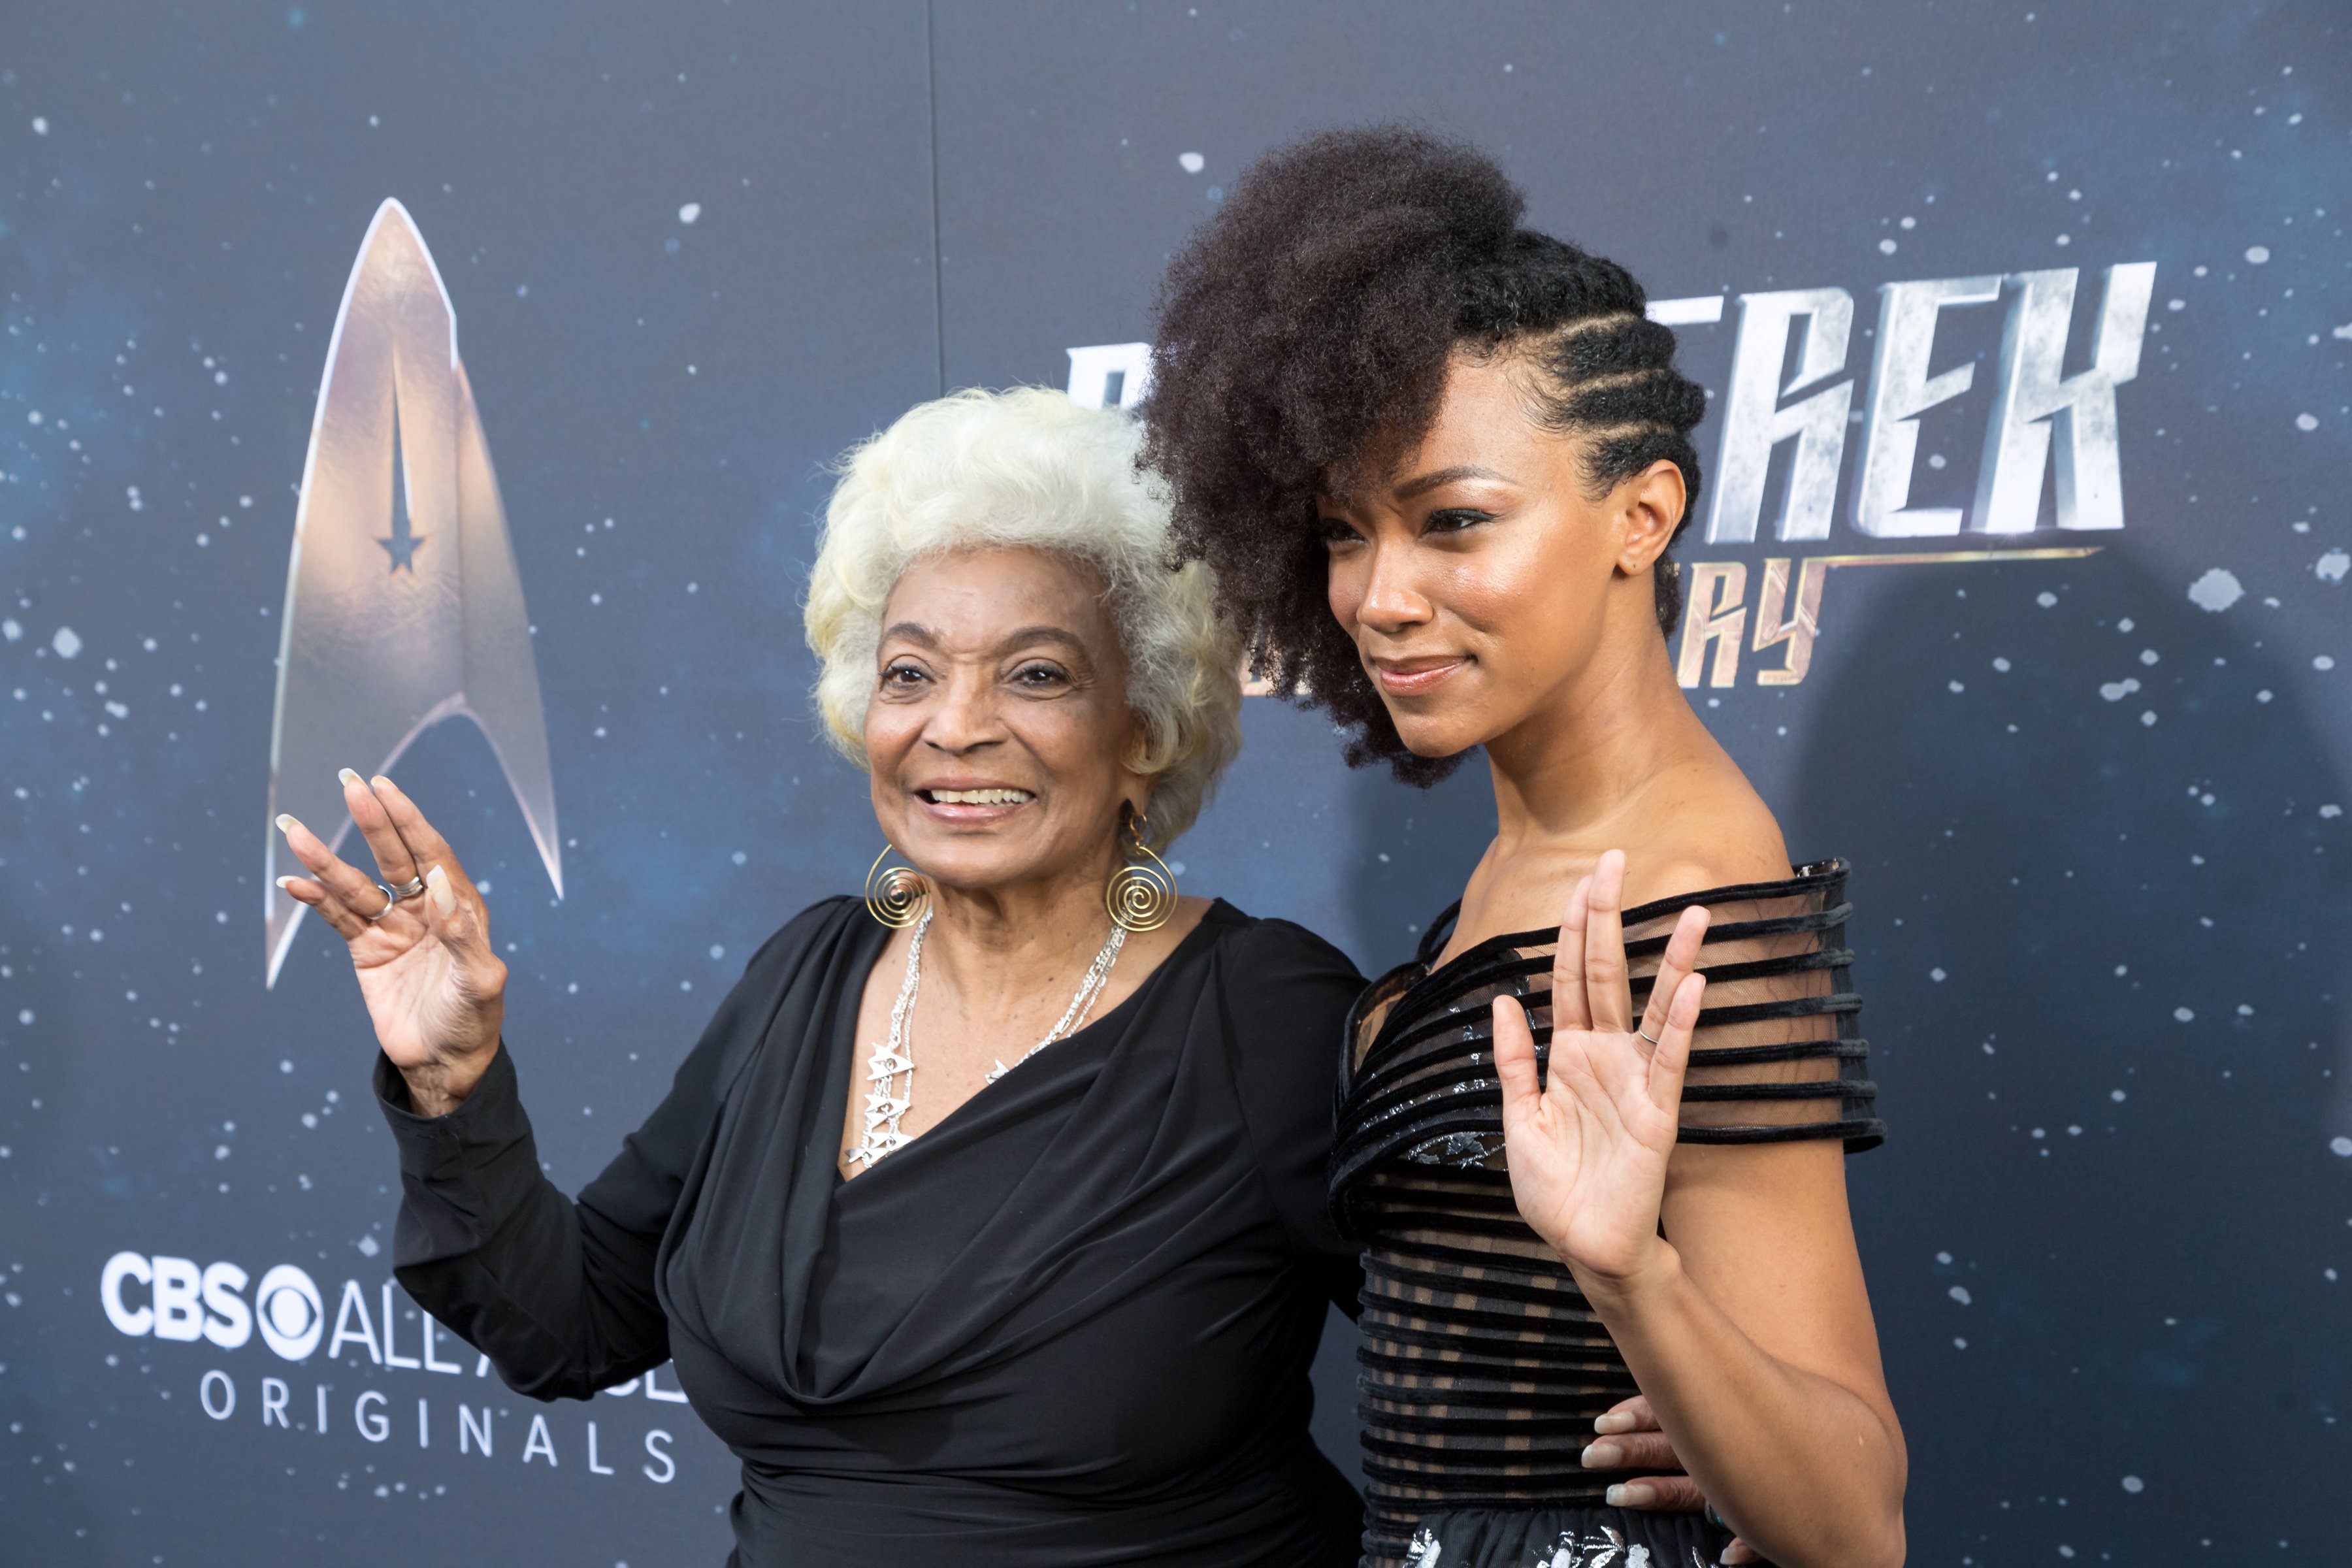 Nichelle Nichols and Sonequa Martin-Green at the premiere of "Star Trek: Discovery" on September 19, 2017, in Los Angeles, California. | Source: Getty Images